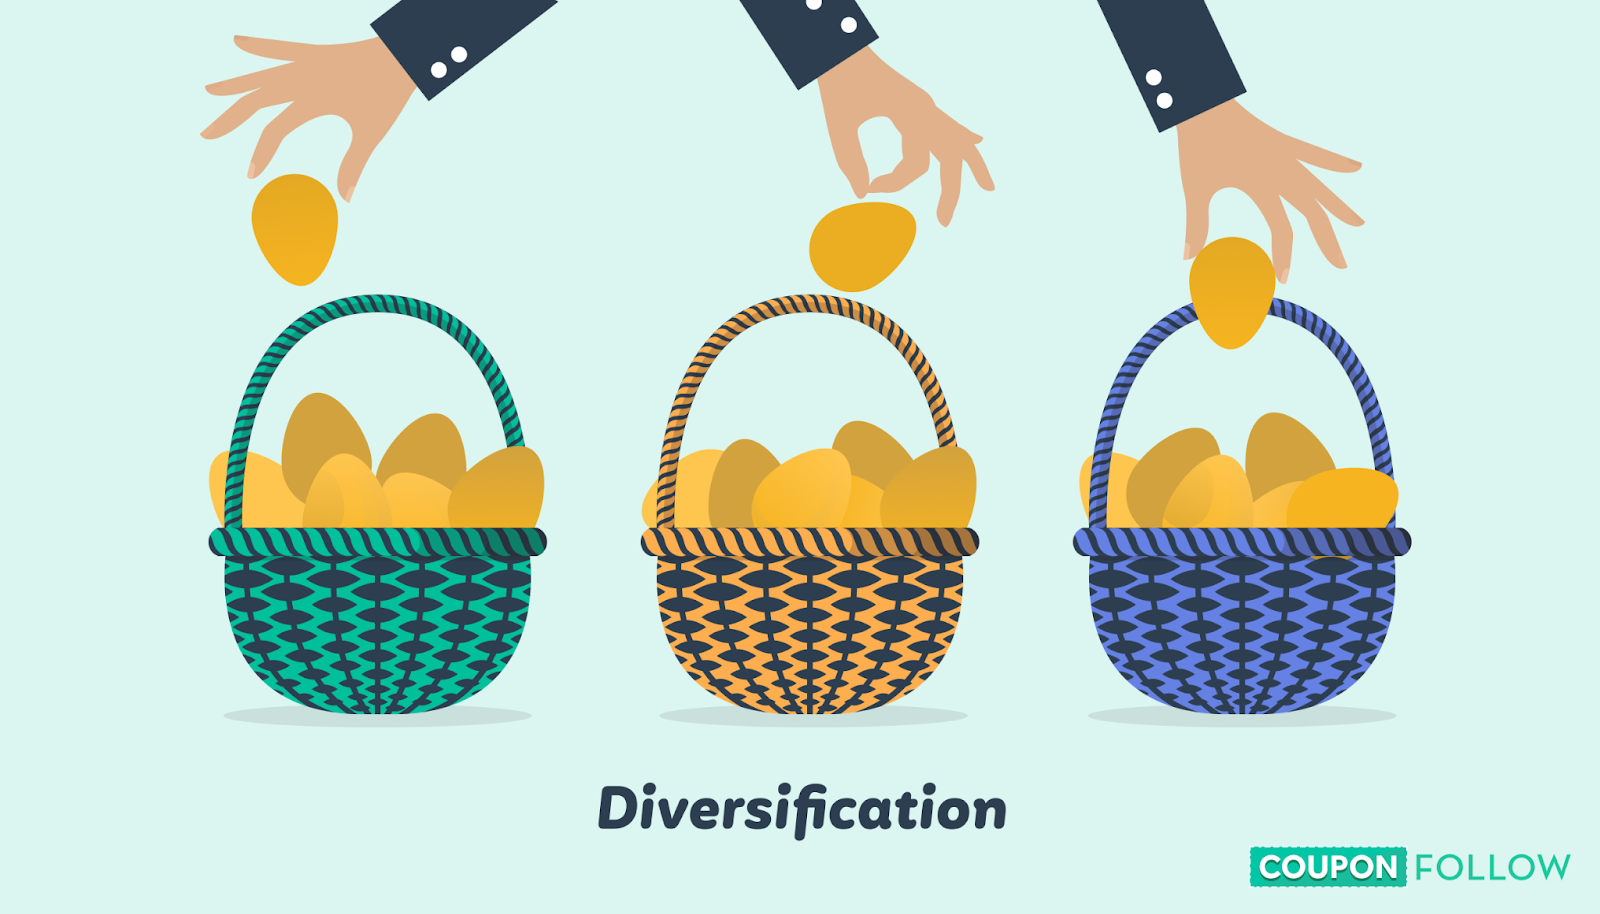  Image explaining the concept of diversification